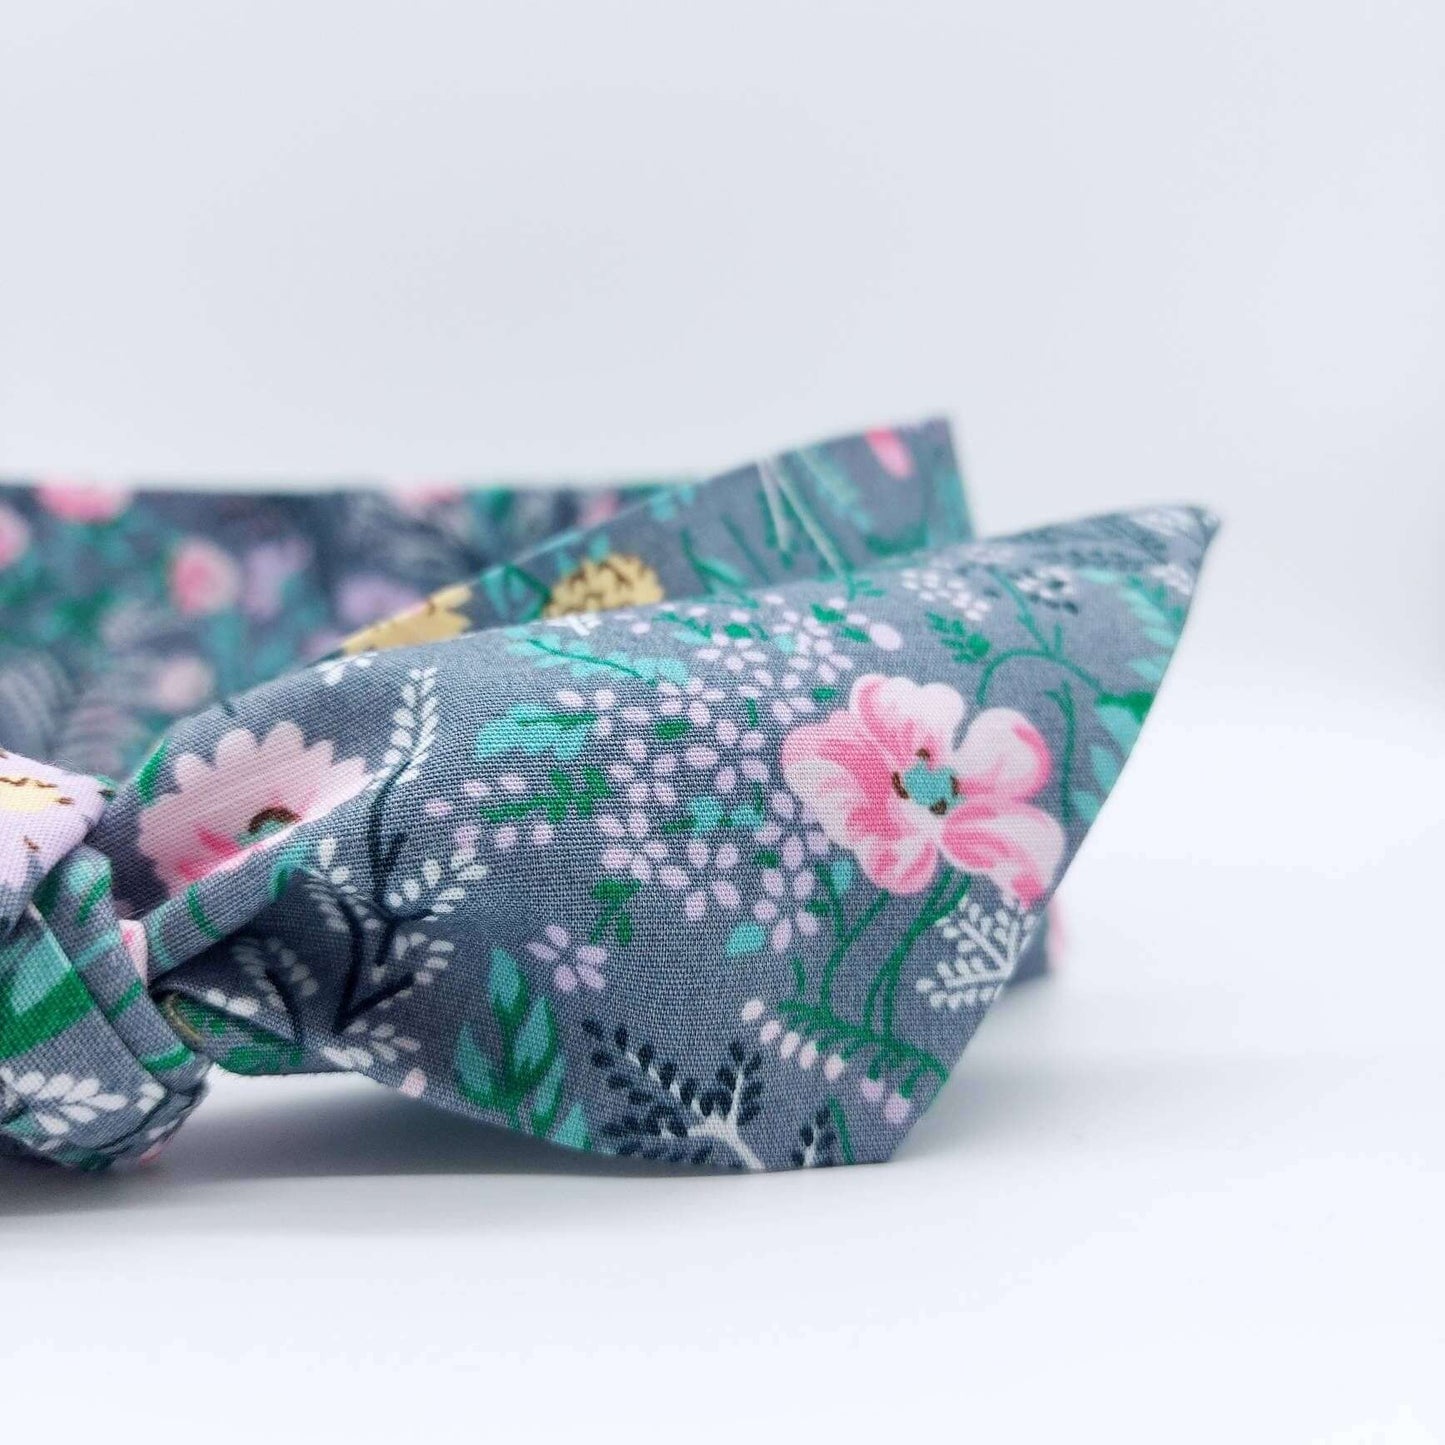 A summery, pale grey, ditsy floral cotton headscarf with tiny pink and green flowers, tied in a pretty knot.